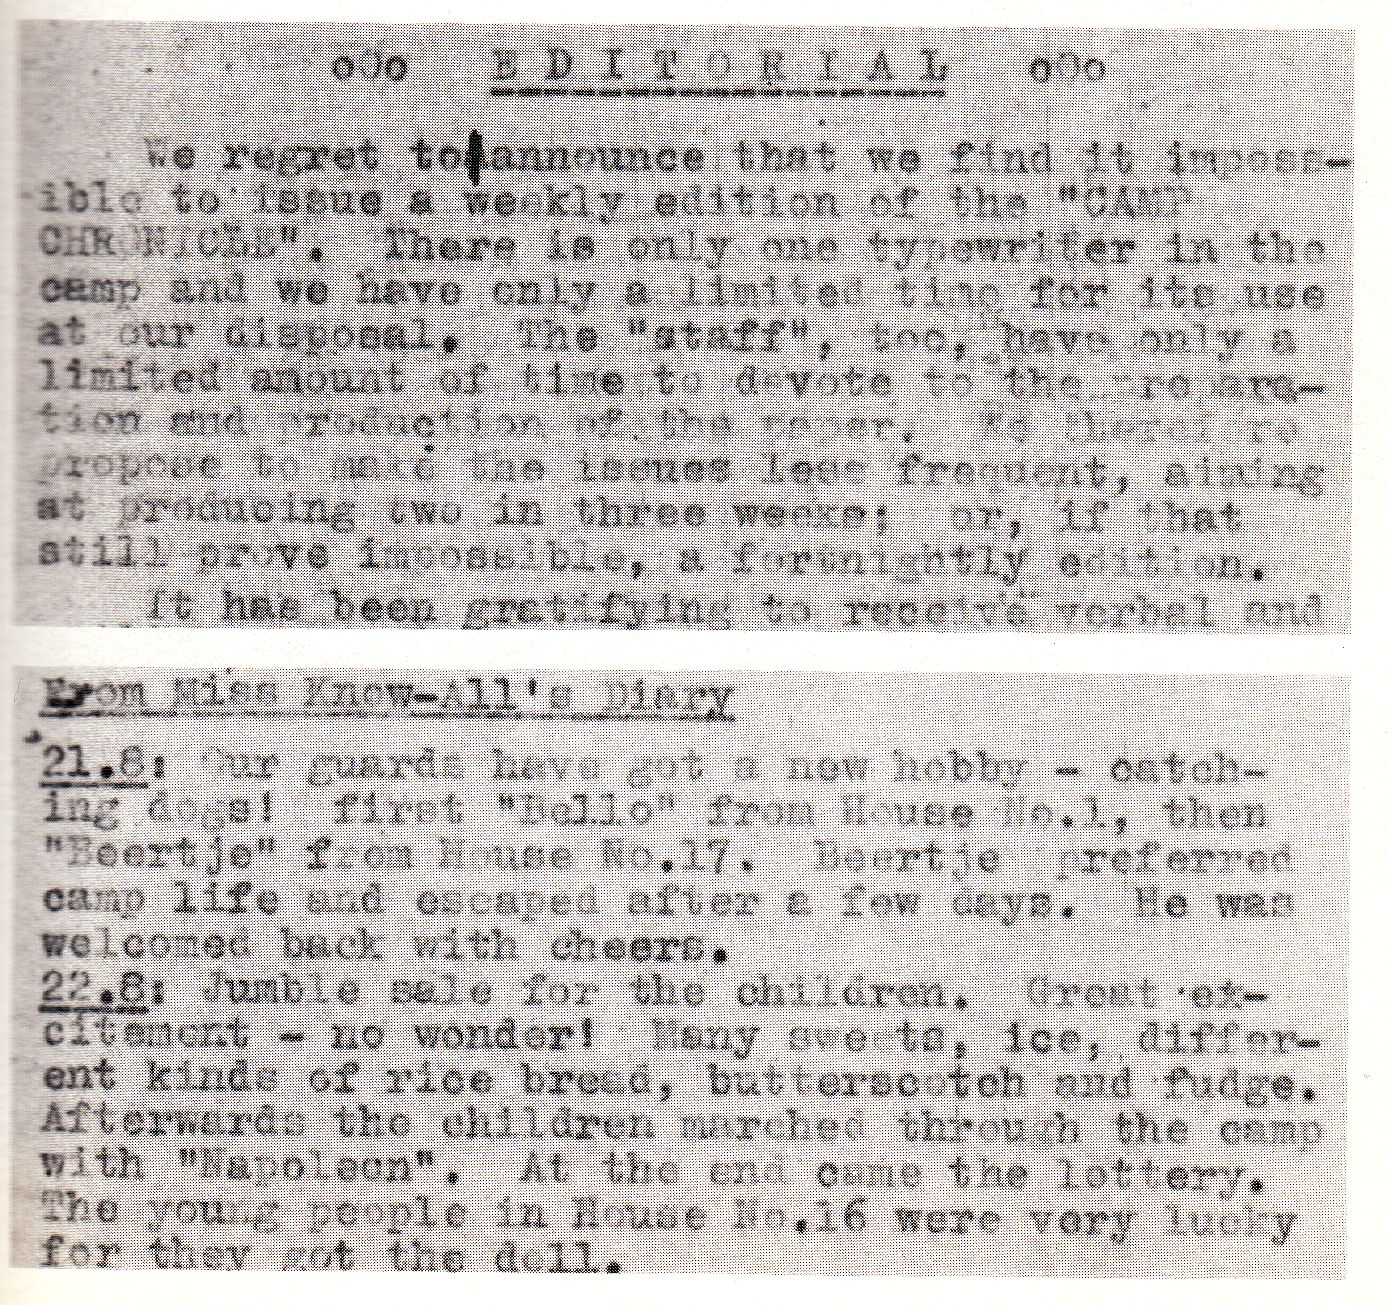 Extract from the Camp Chronicle